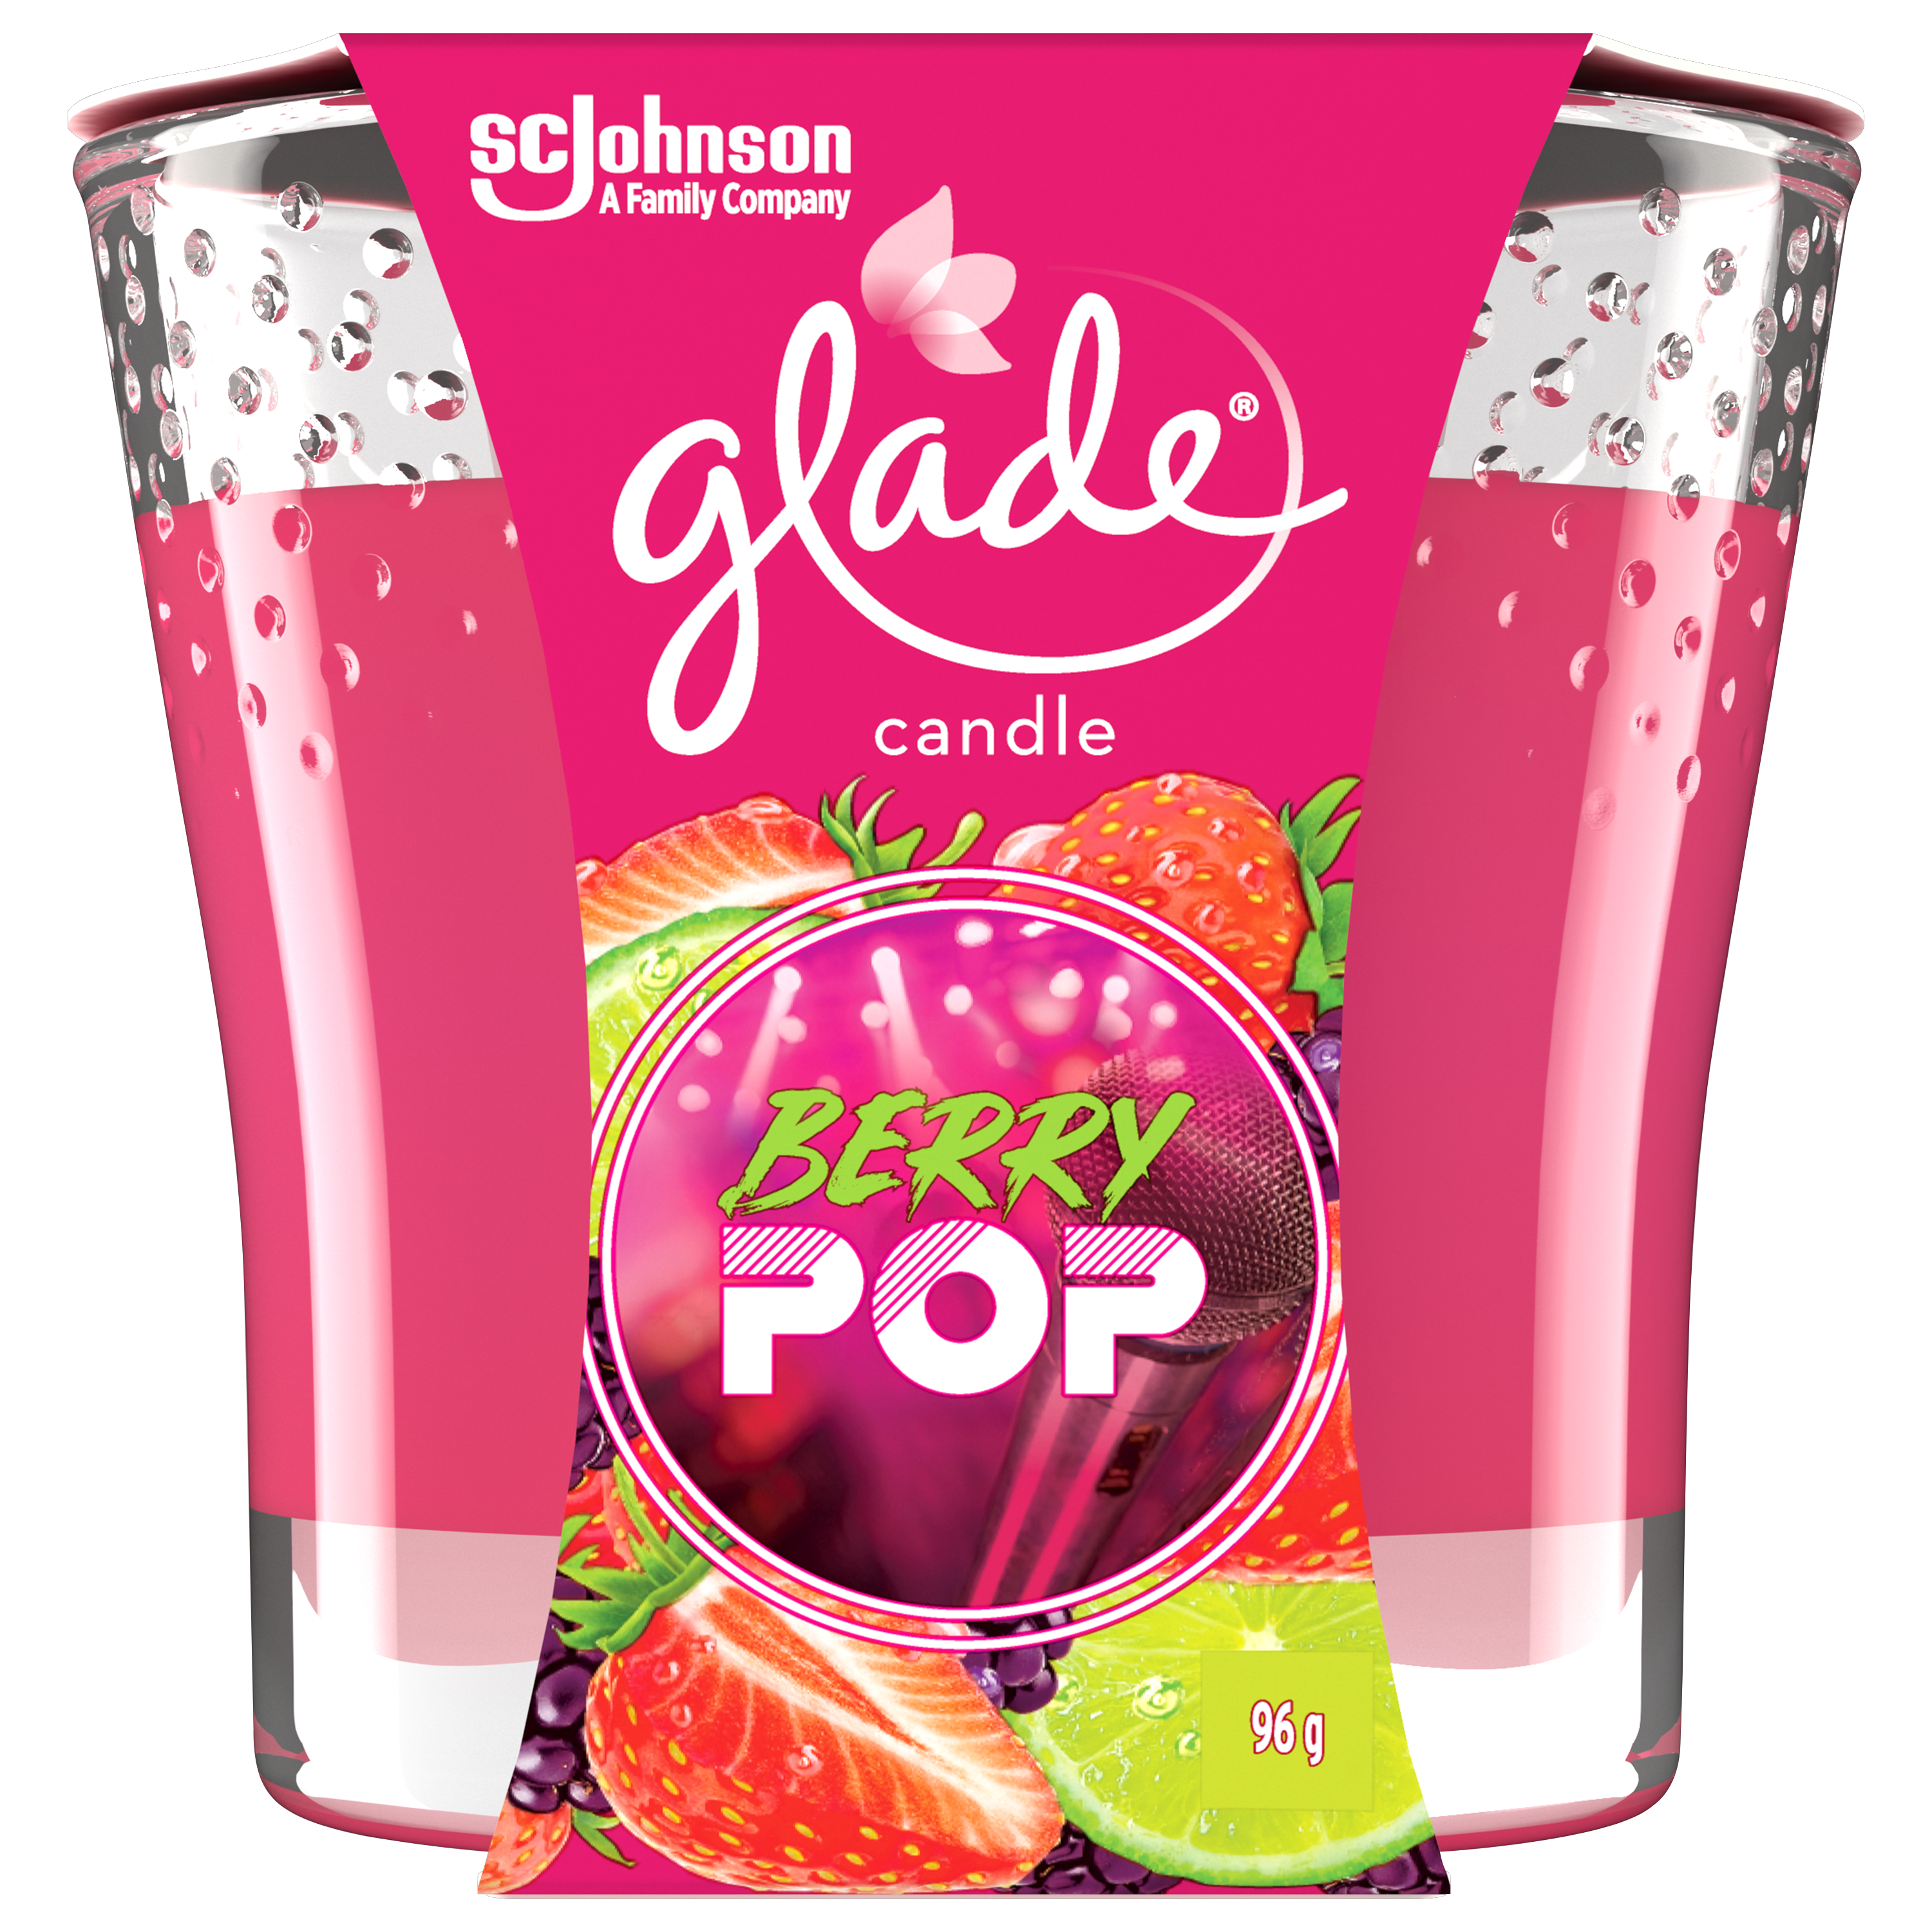 Glade® Candle - Limited Edition